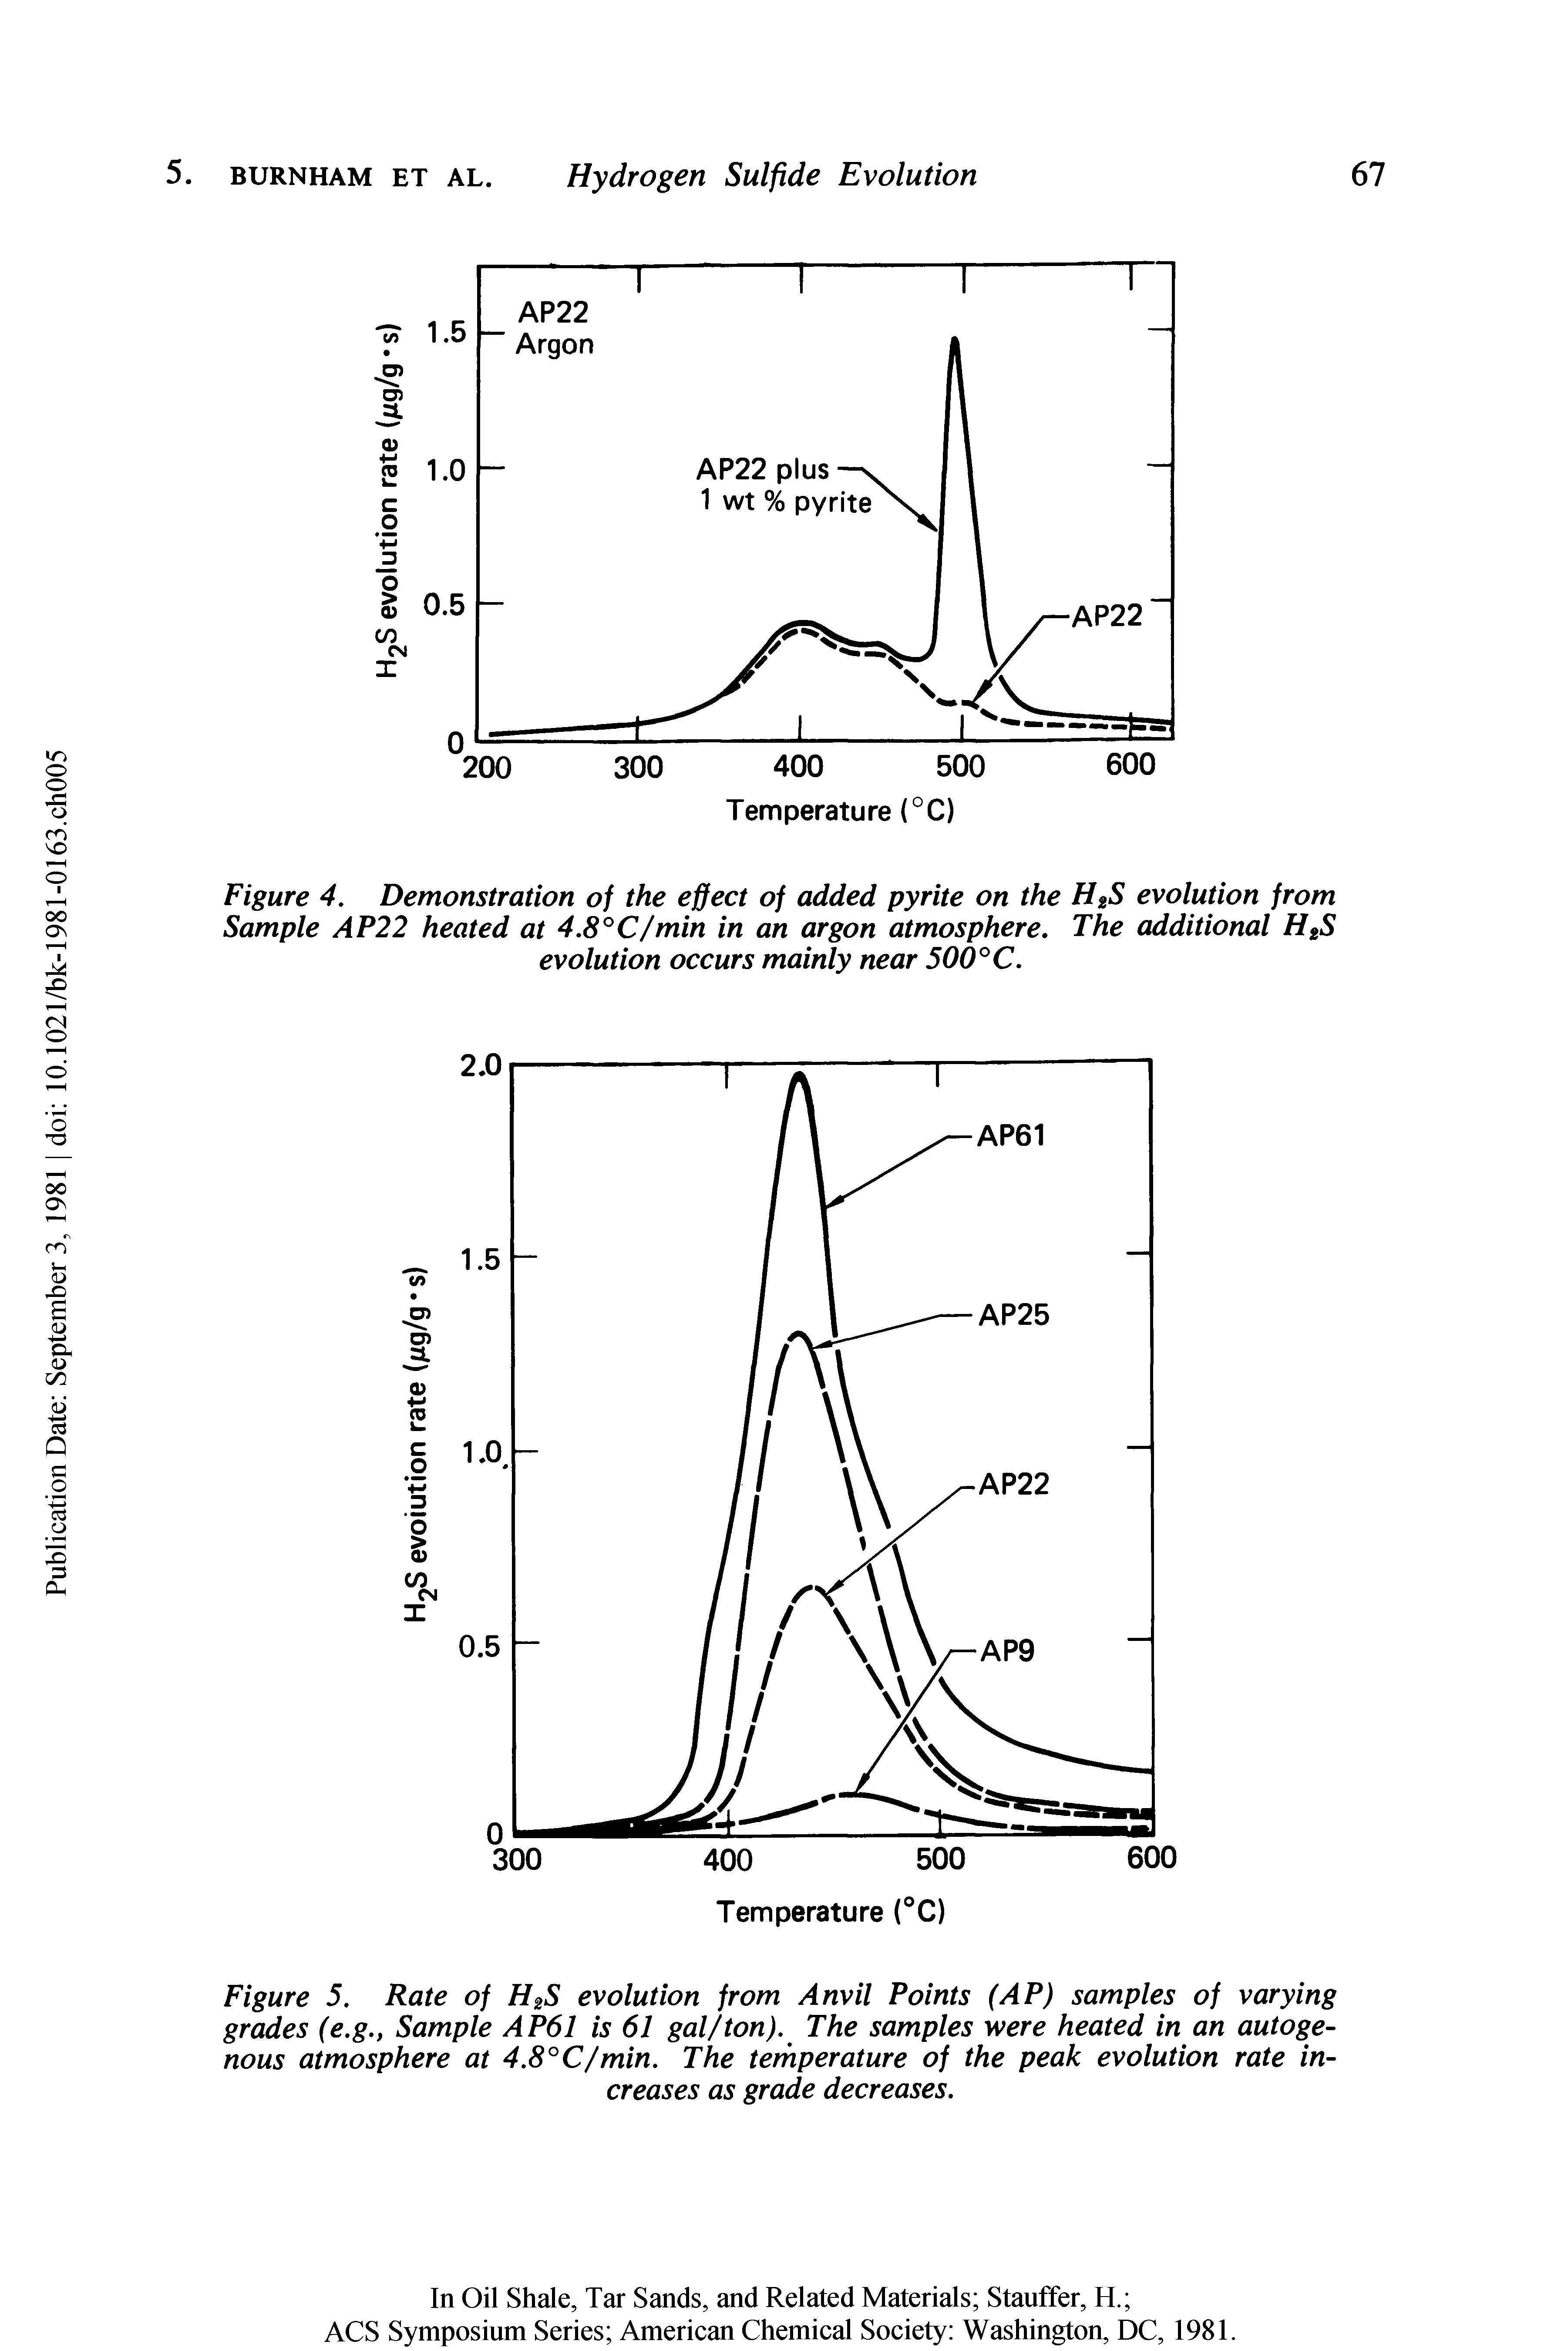 Figure 5. Rate of H2S evolution from Anvil Points (AP) samples of varying grades (e.g., Sample AP61 is 61 gal/ton). The samples were heated in an autogenous atmosphere at 4.8°C/min. The temperature of the peak evolution rate increases as grade decreases.